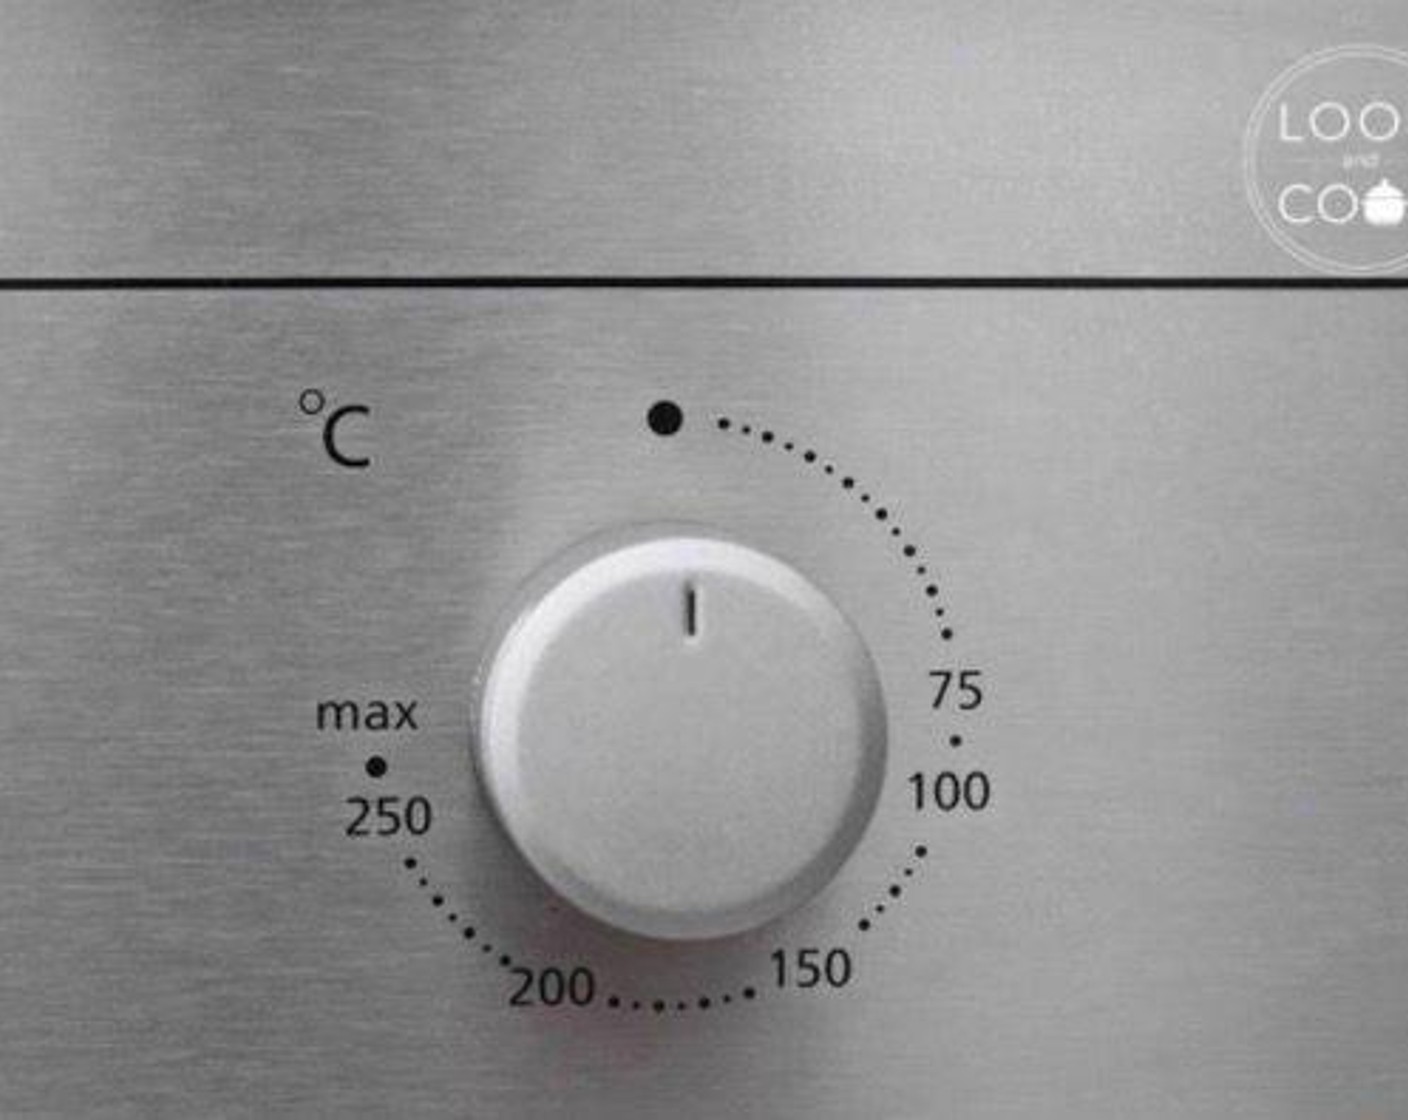 step 1 Preheat the oven to 190 degrees C (375 degrees F).